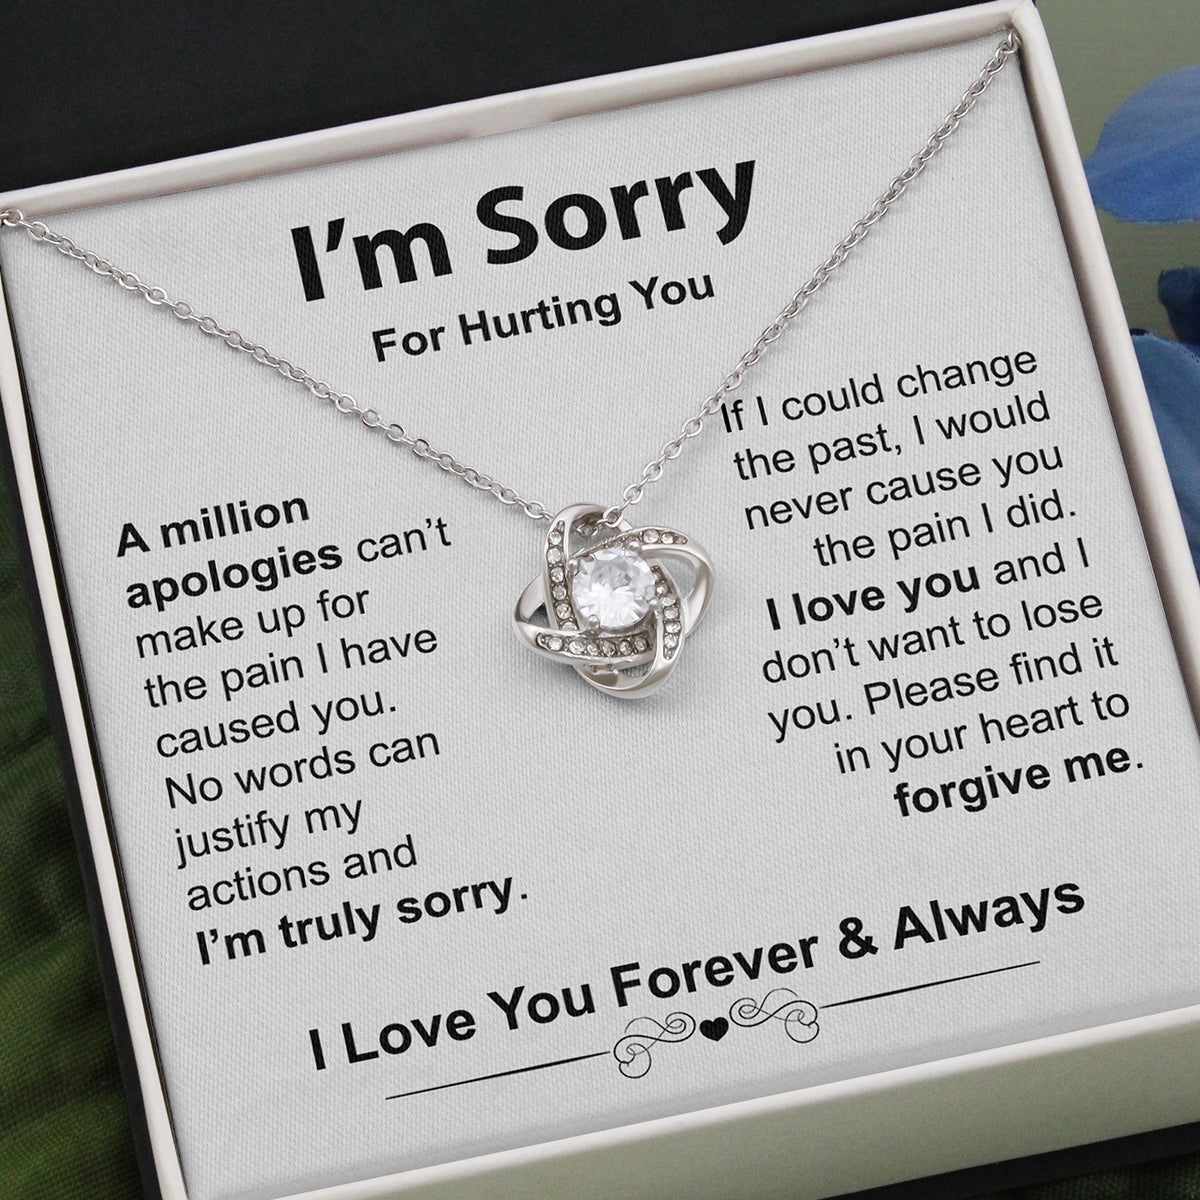 I'm Sorry For Hurting You - Love Knot Necklace